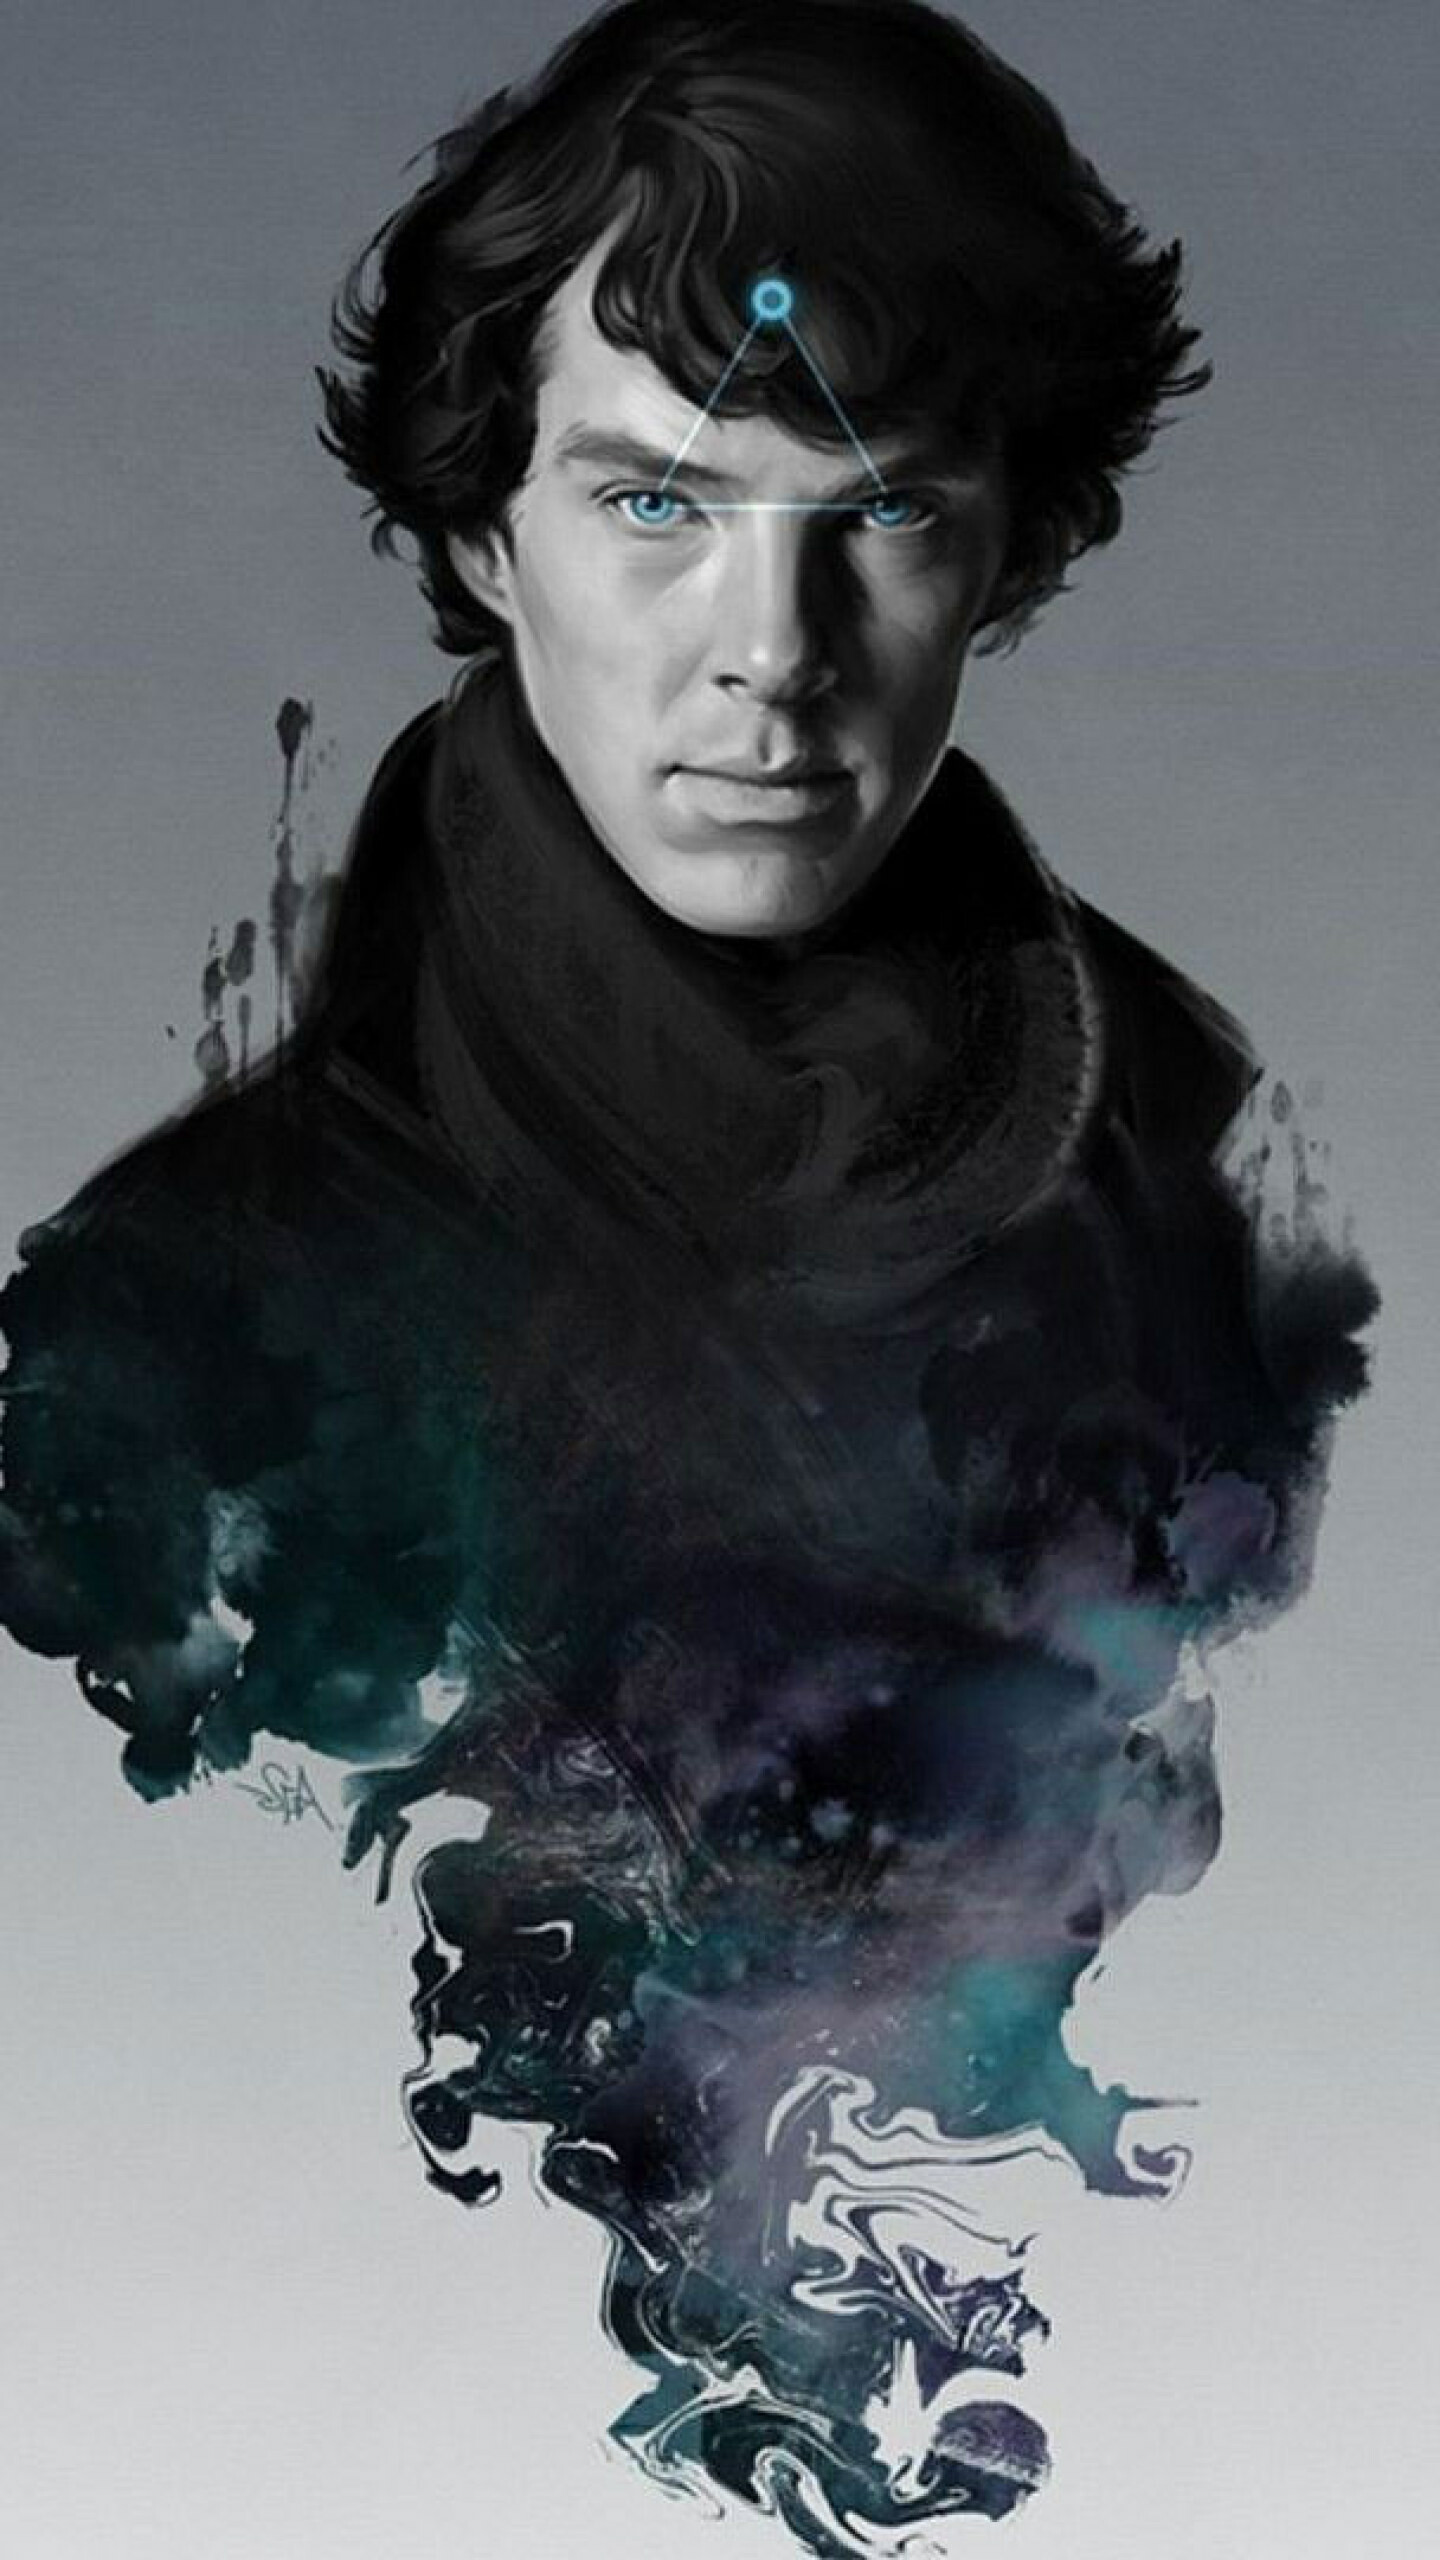 Sherlock (TV Series): Known for his proficiency with observation, deduction, forensic science, and logical reasoning that borders on the fantastic, which he employs when investigating cases for a wide variety of clients, including Scotland Yard. 1440x2560 HD Wallpaper.